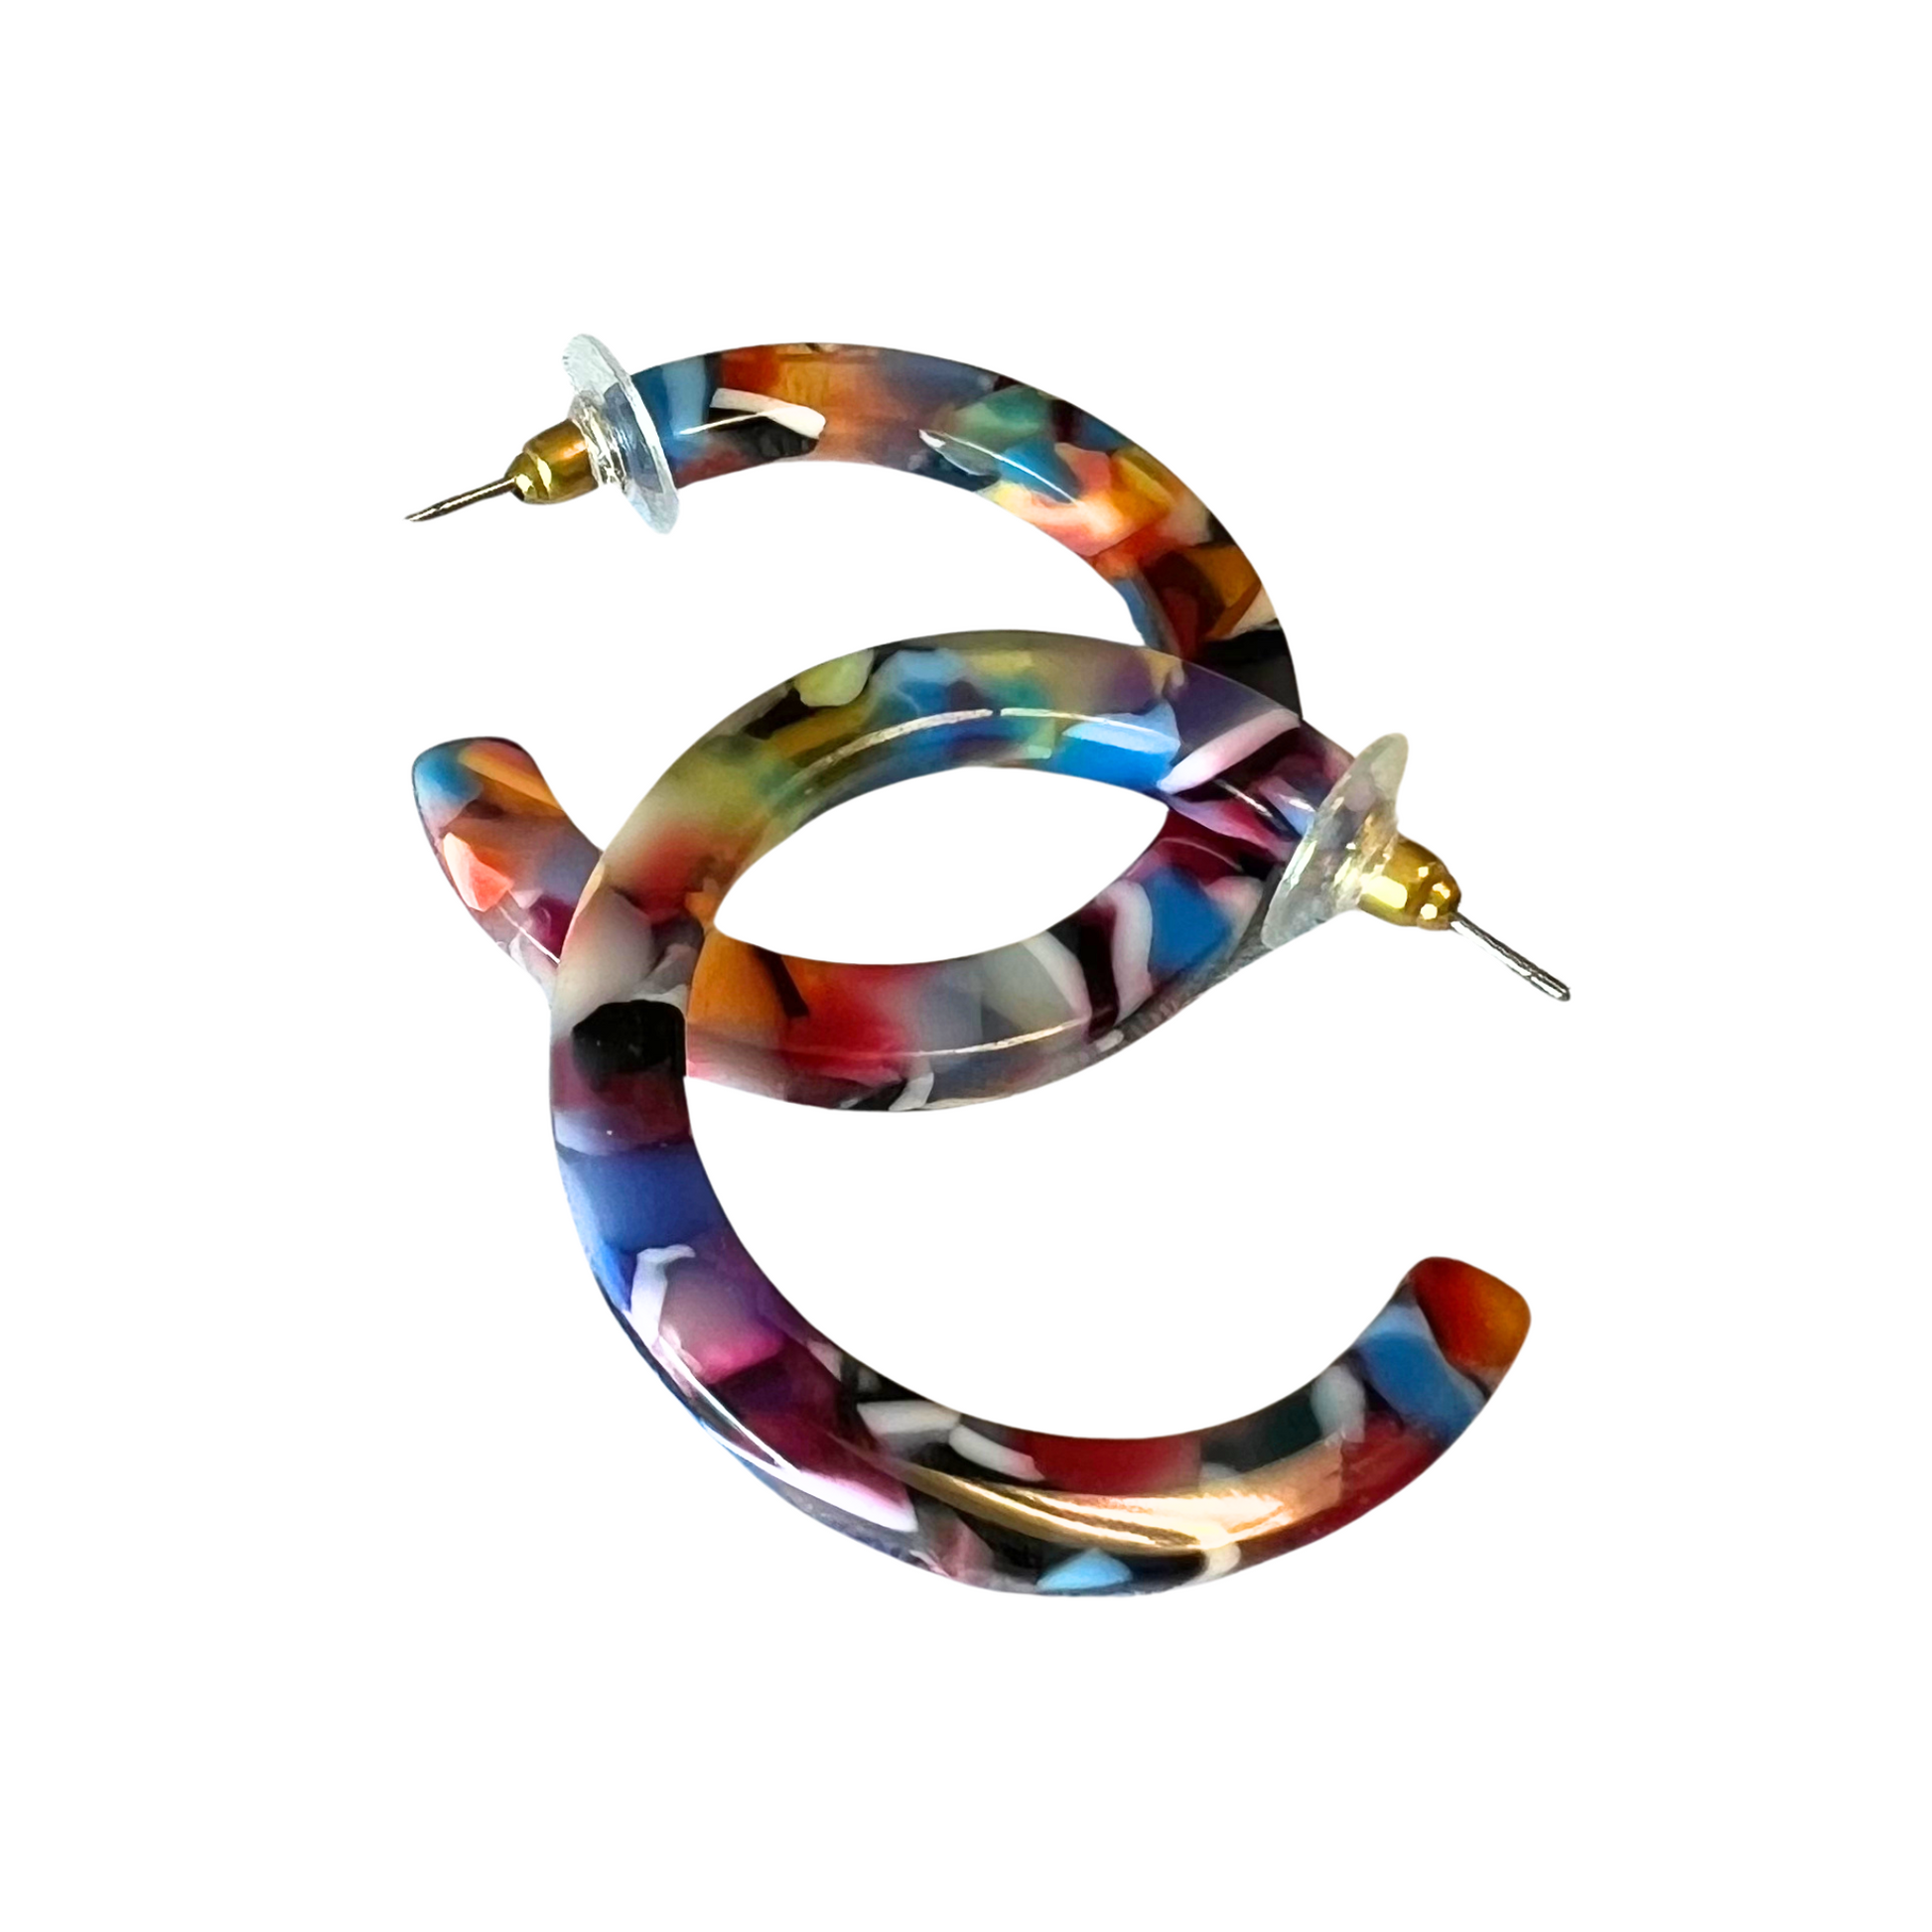 Introducing Multi Color Acrylic Hoops, perfect for making a bold statement. These hoops feature vibrant colors and a unique marble effect, plus they are lightweight for easy wear. Make a statement with these beautiful and stylish earrings.